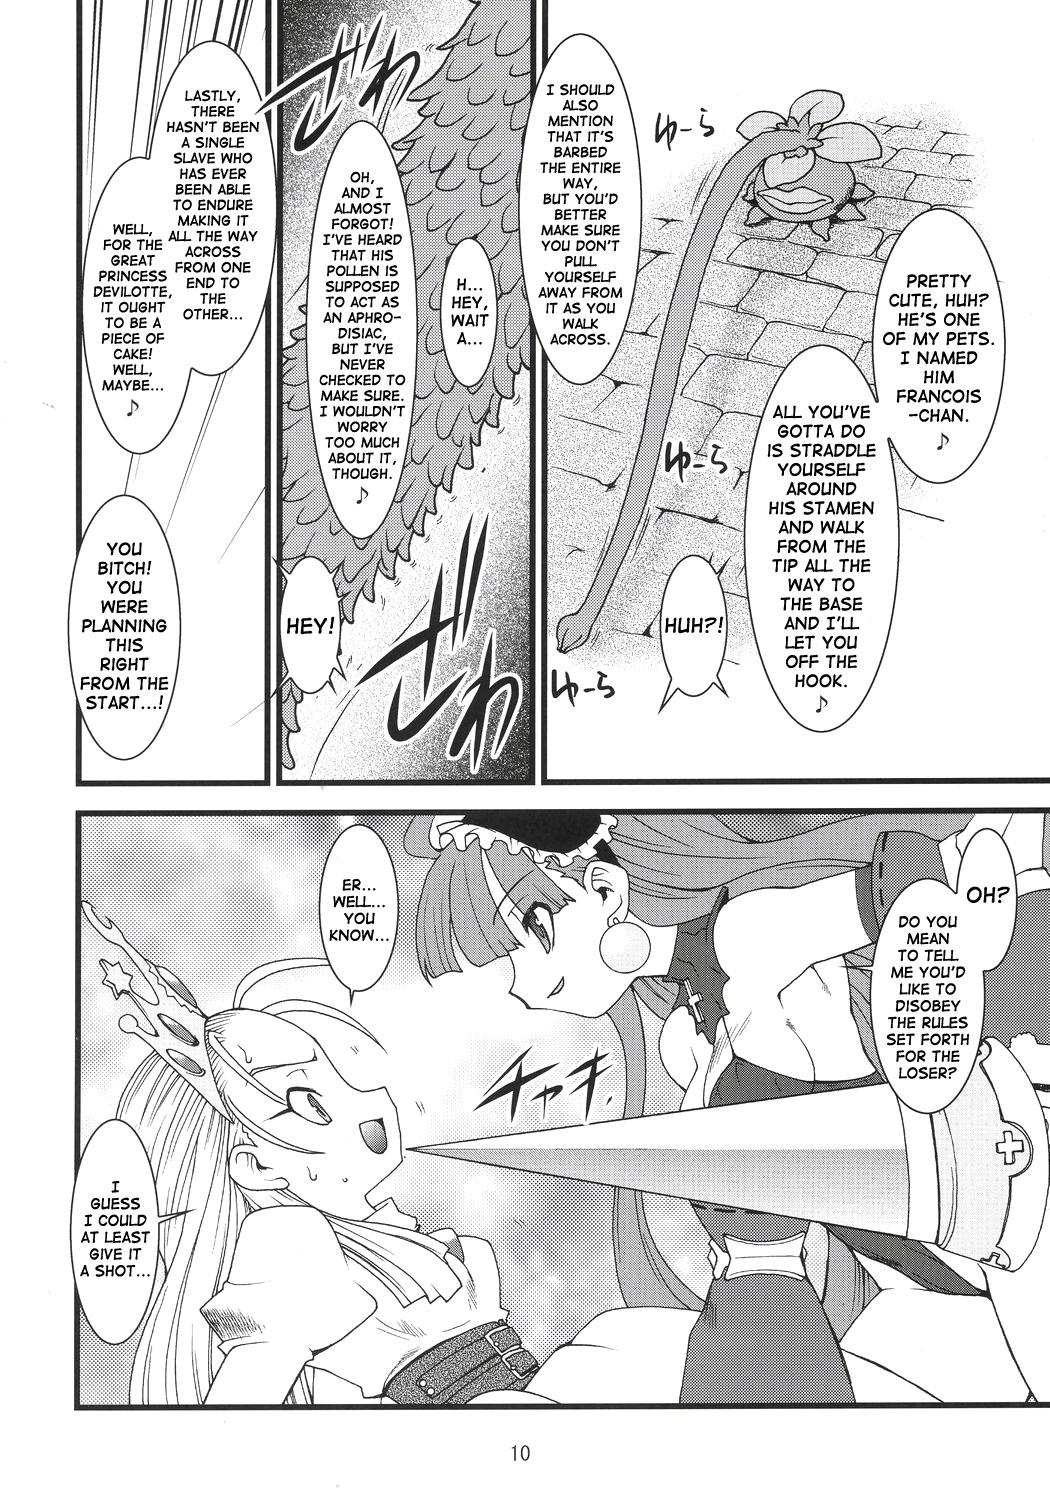 Hugetits Royal Standard 2 - Cyberbots La pucelle Ex Girlfriends - Page 9